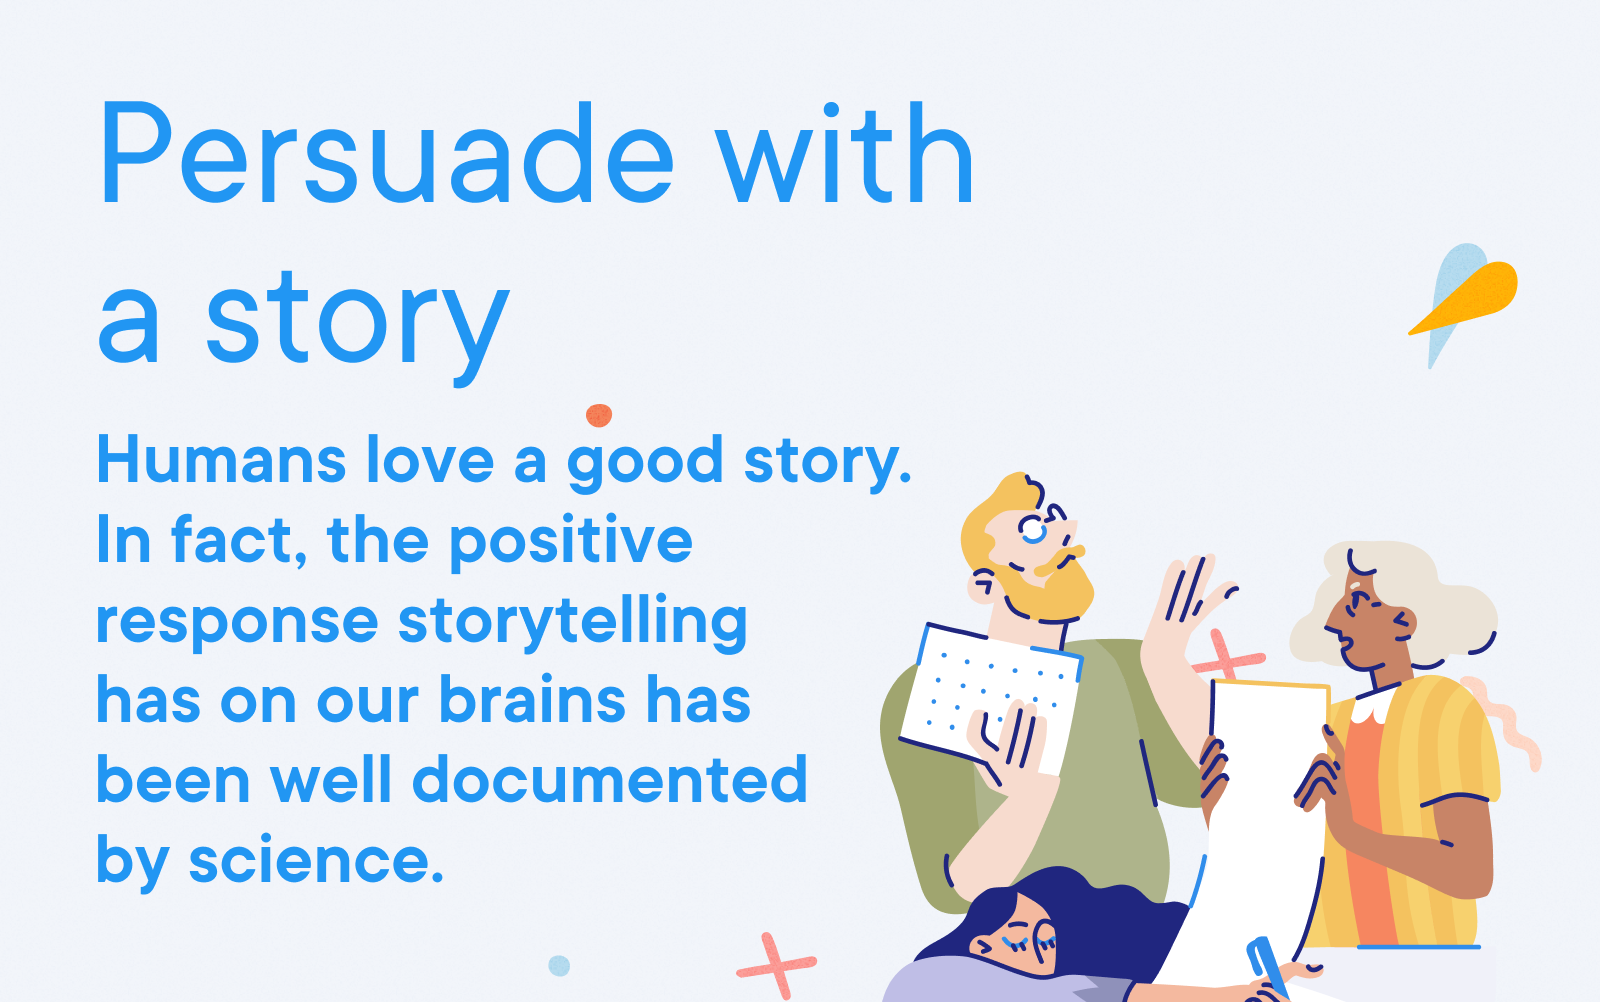 Data Scientist - Persuade with a story